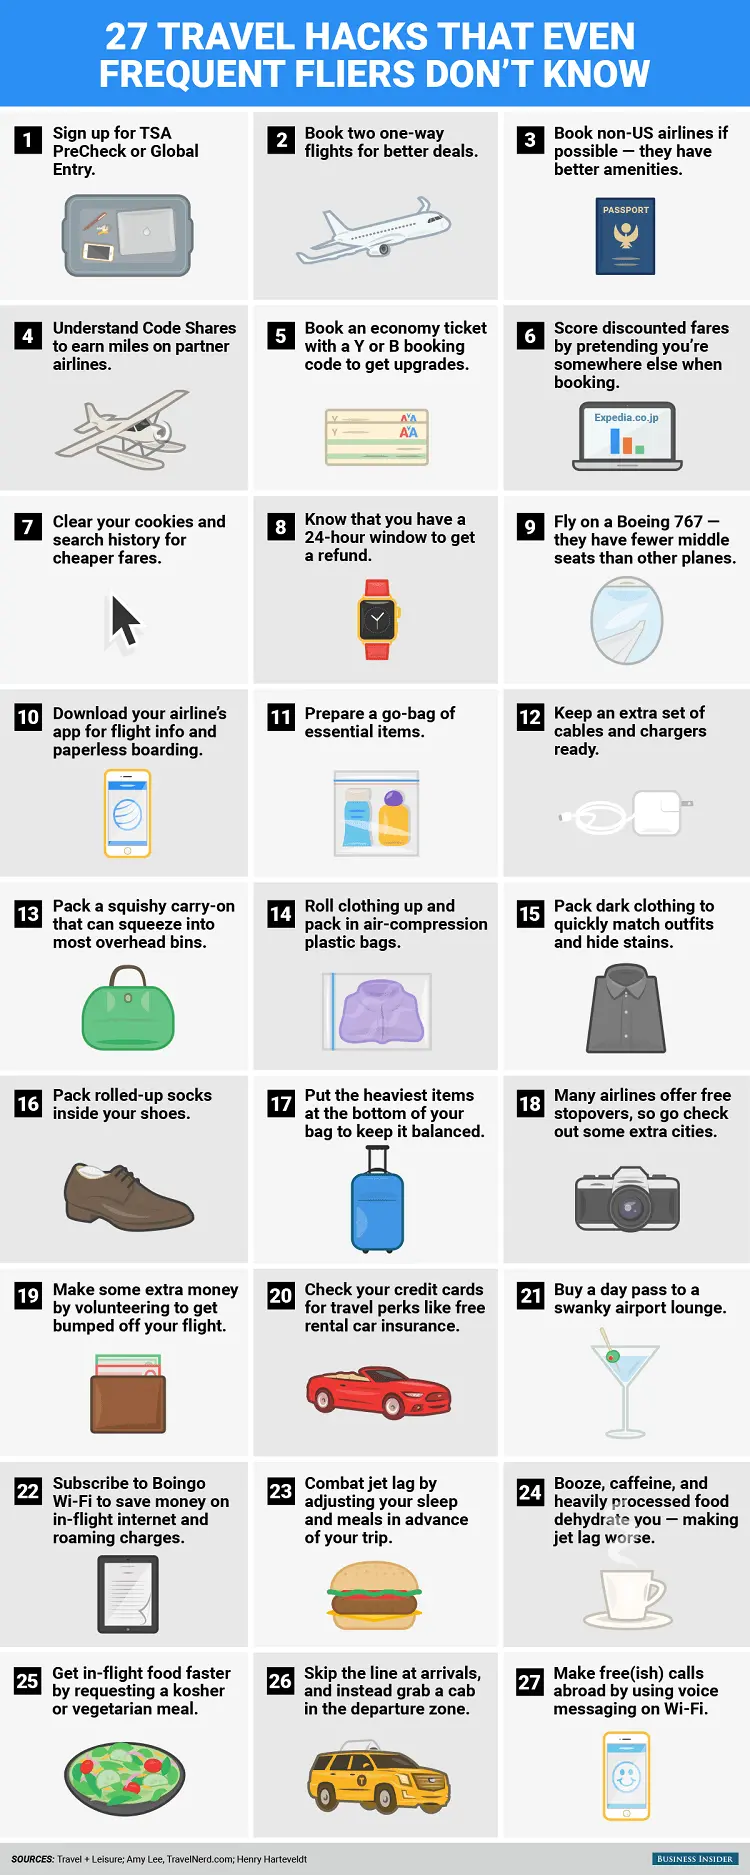 27 travel hacks that even frequent fliers don't know